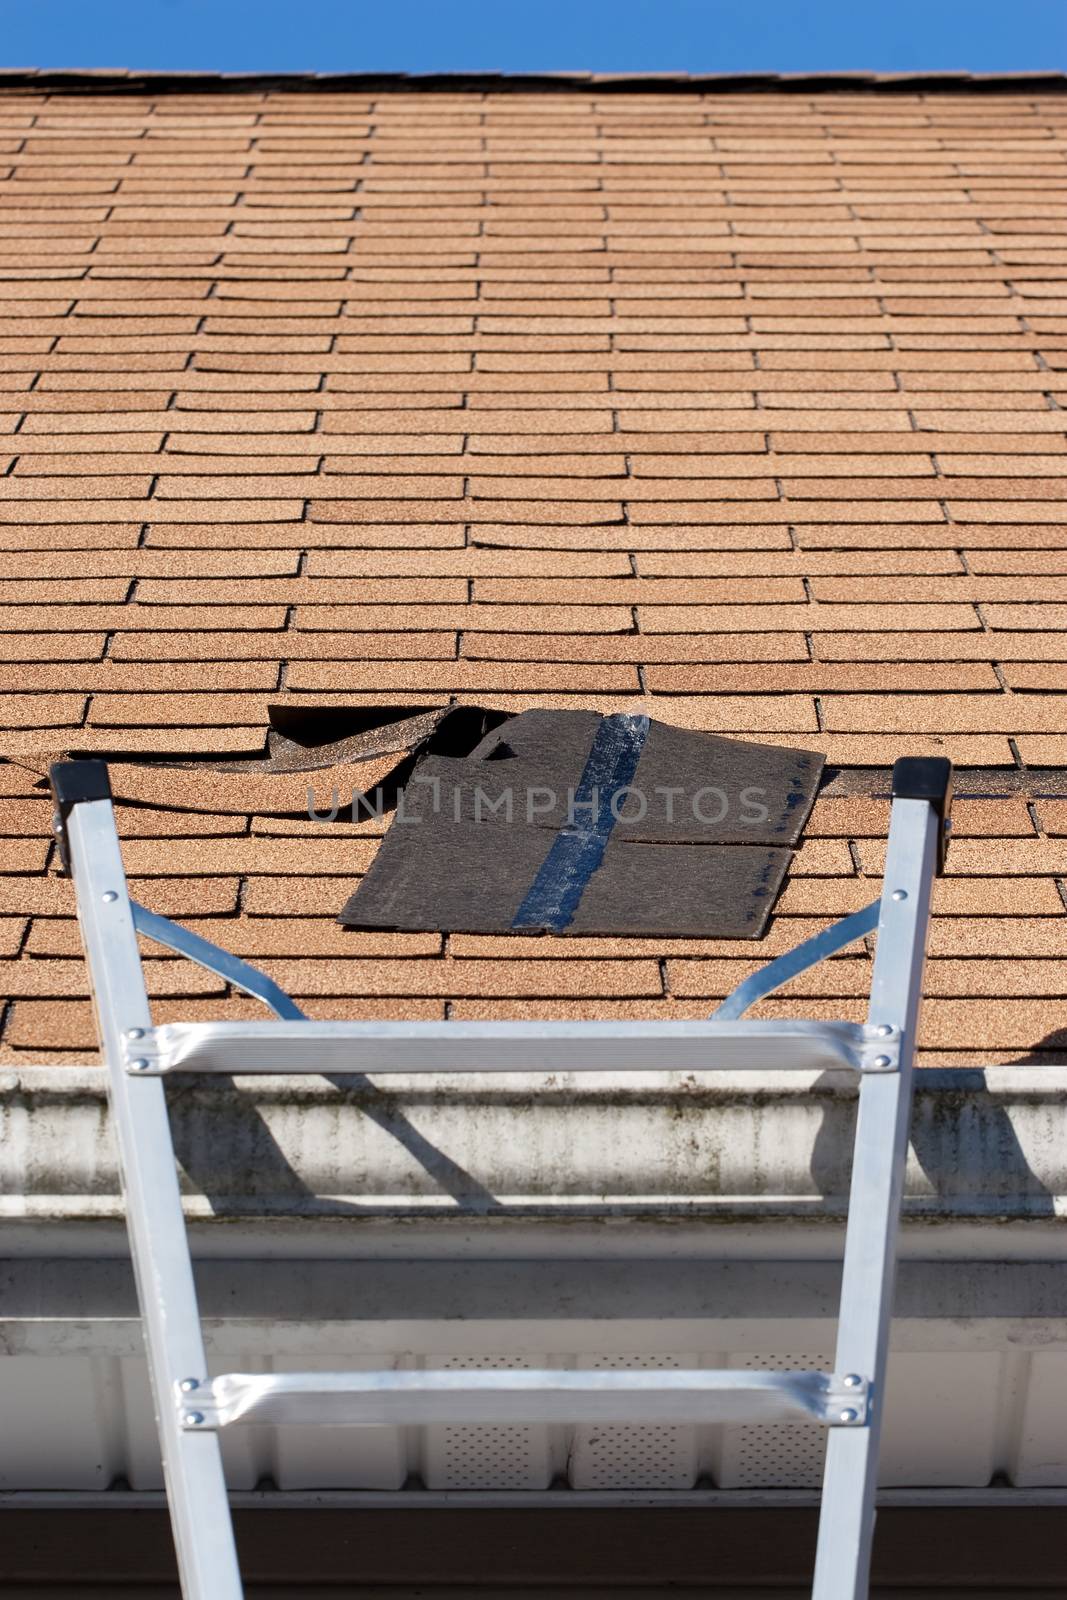 Roofing Repair by graficallyminded